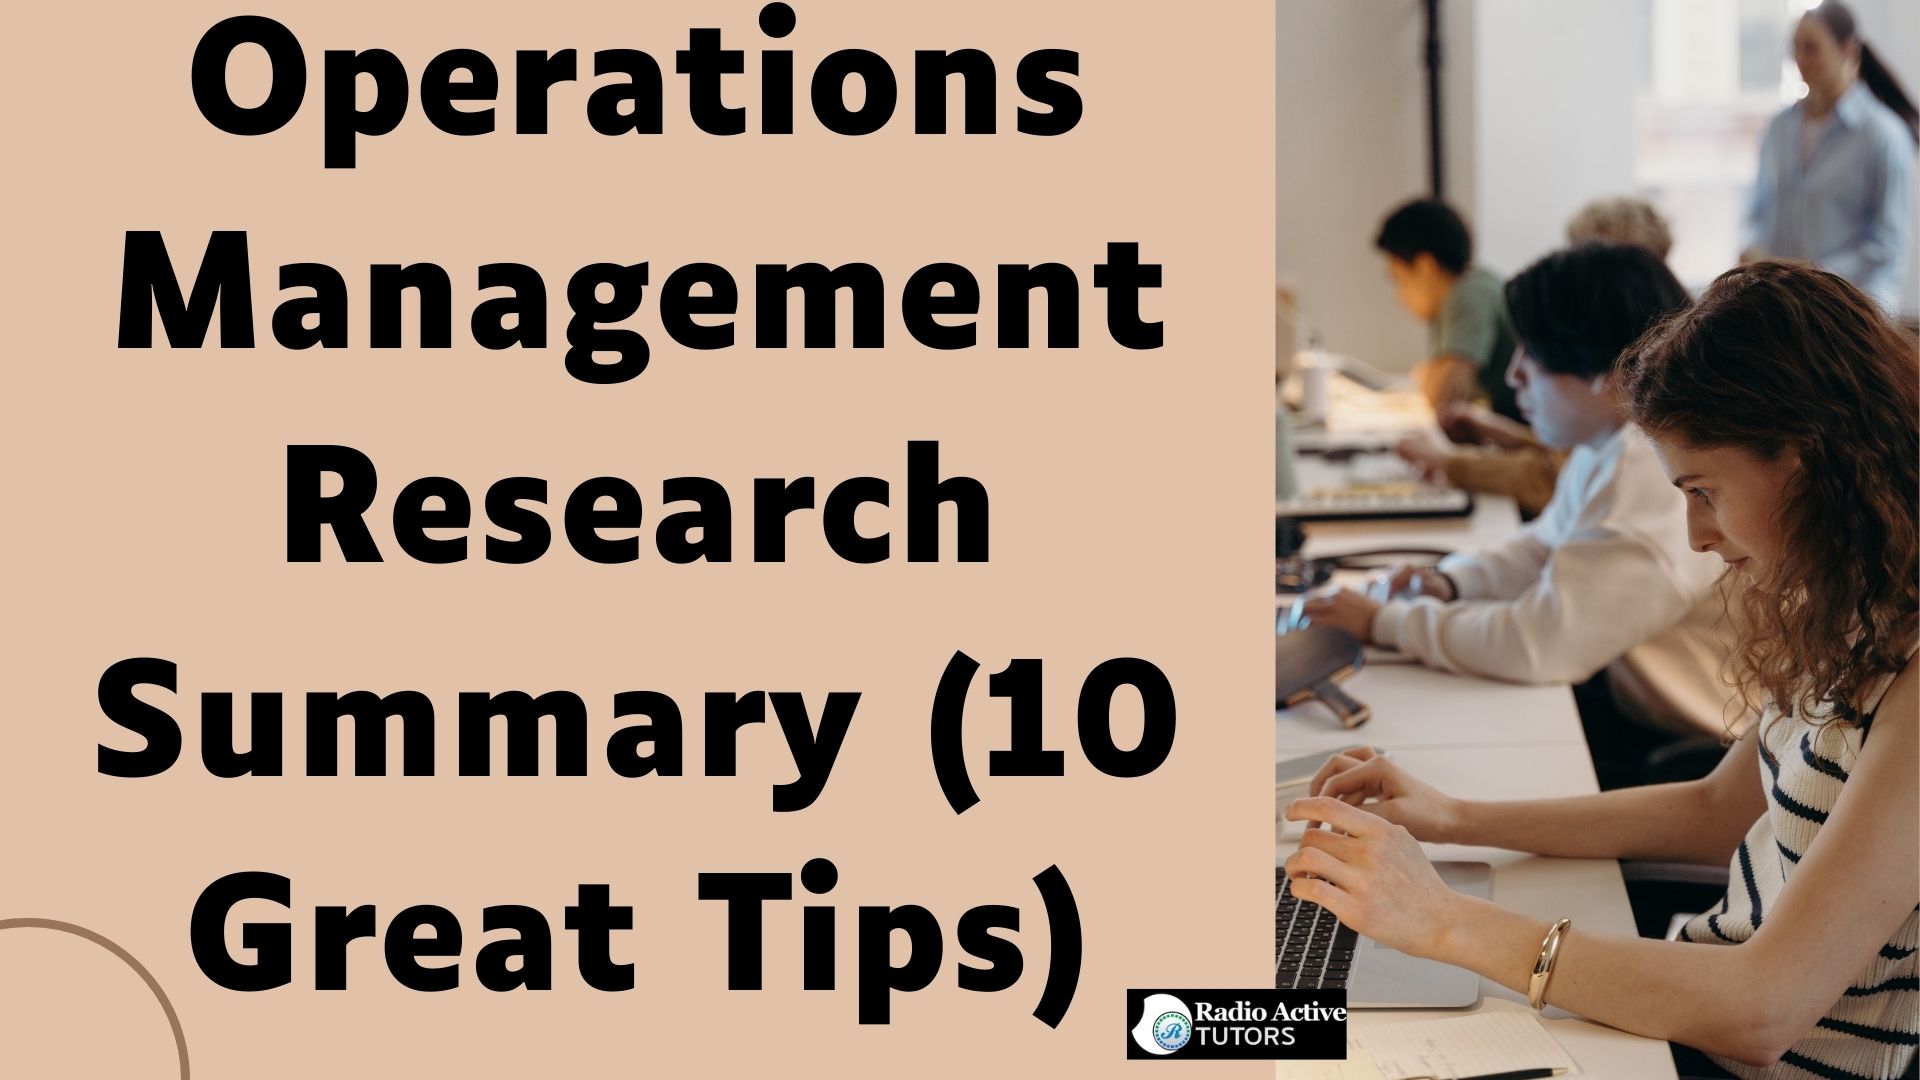 Operations Management Research Summary (10 Great Tips)